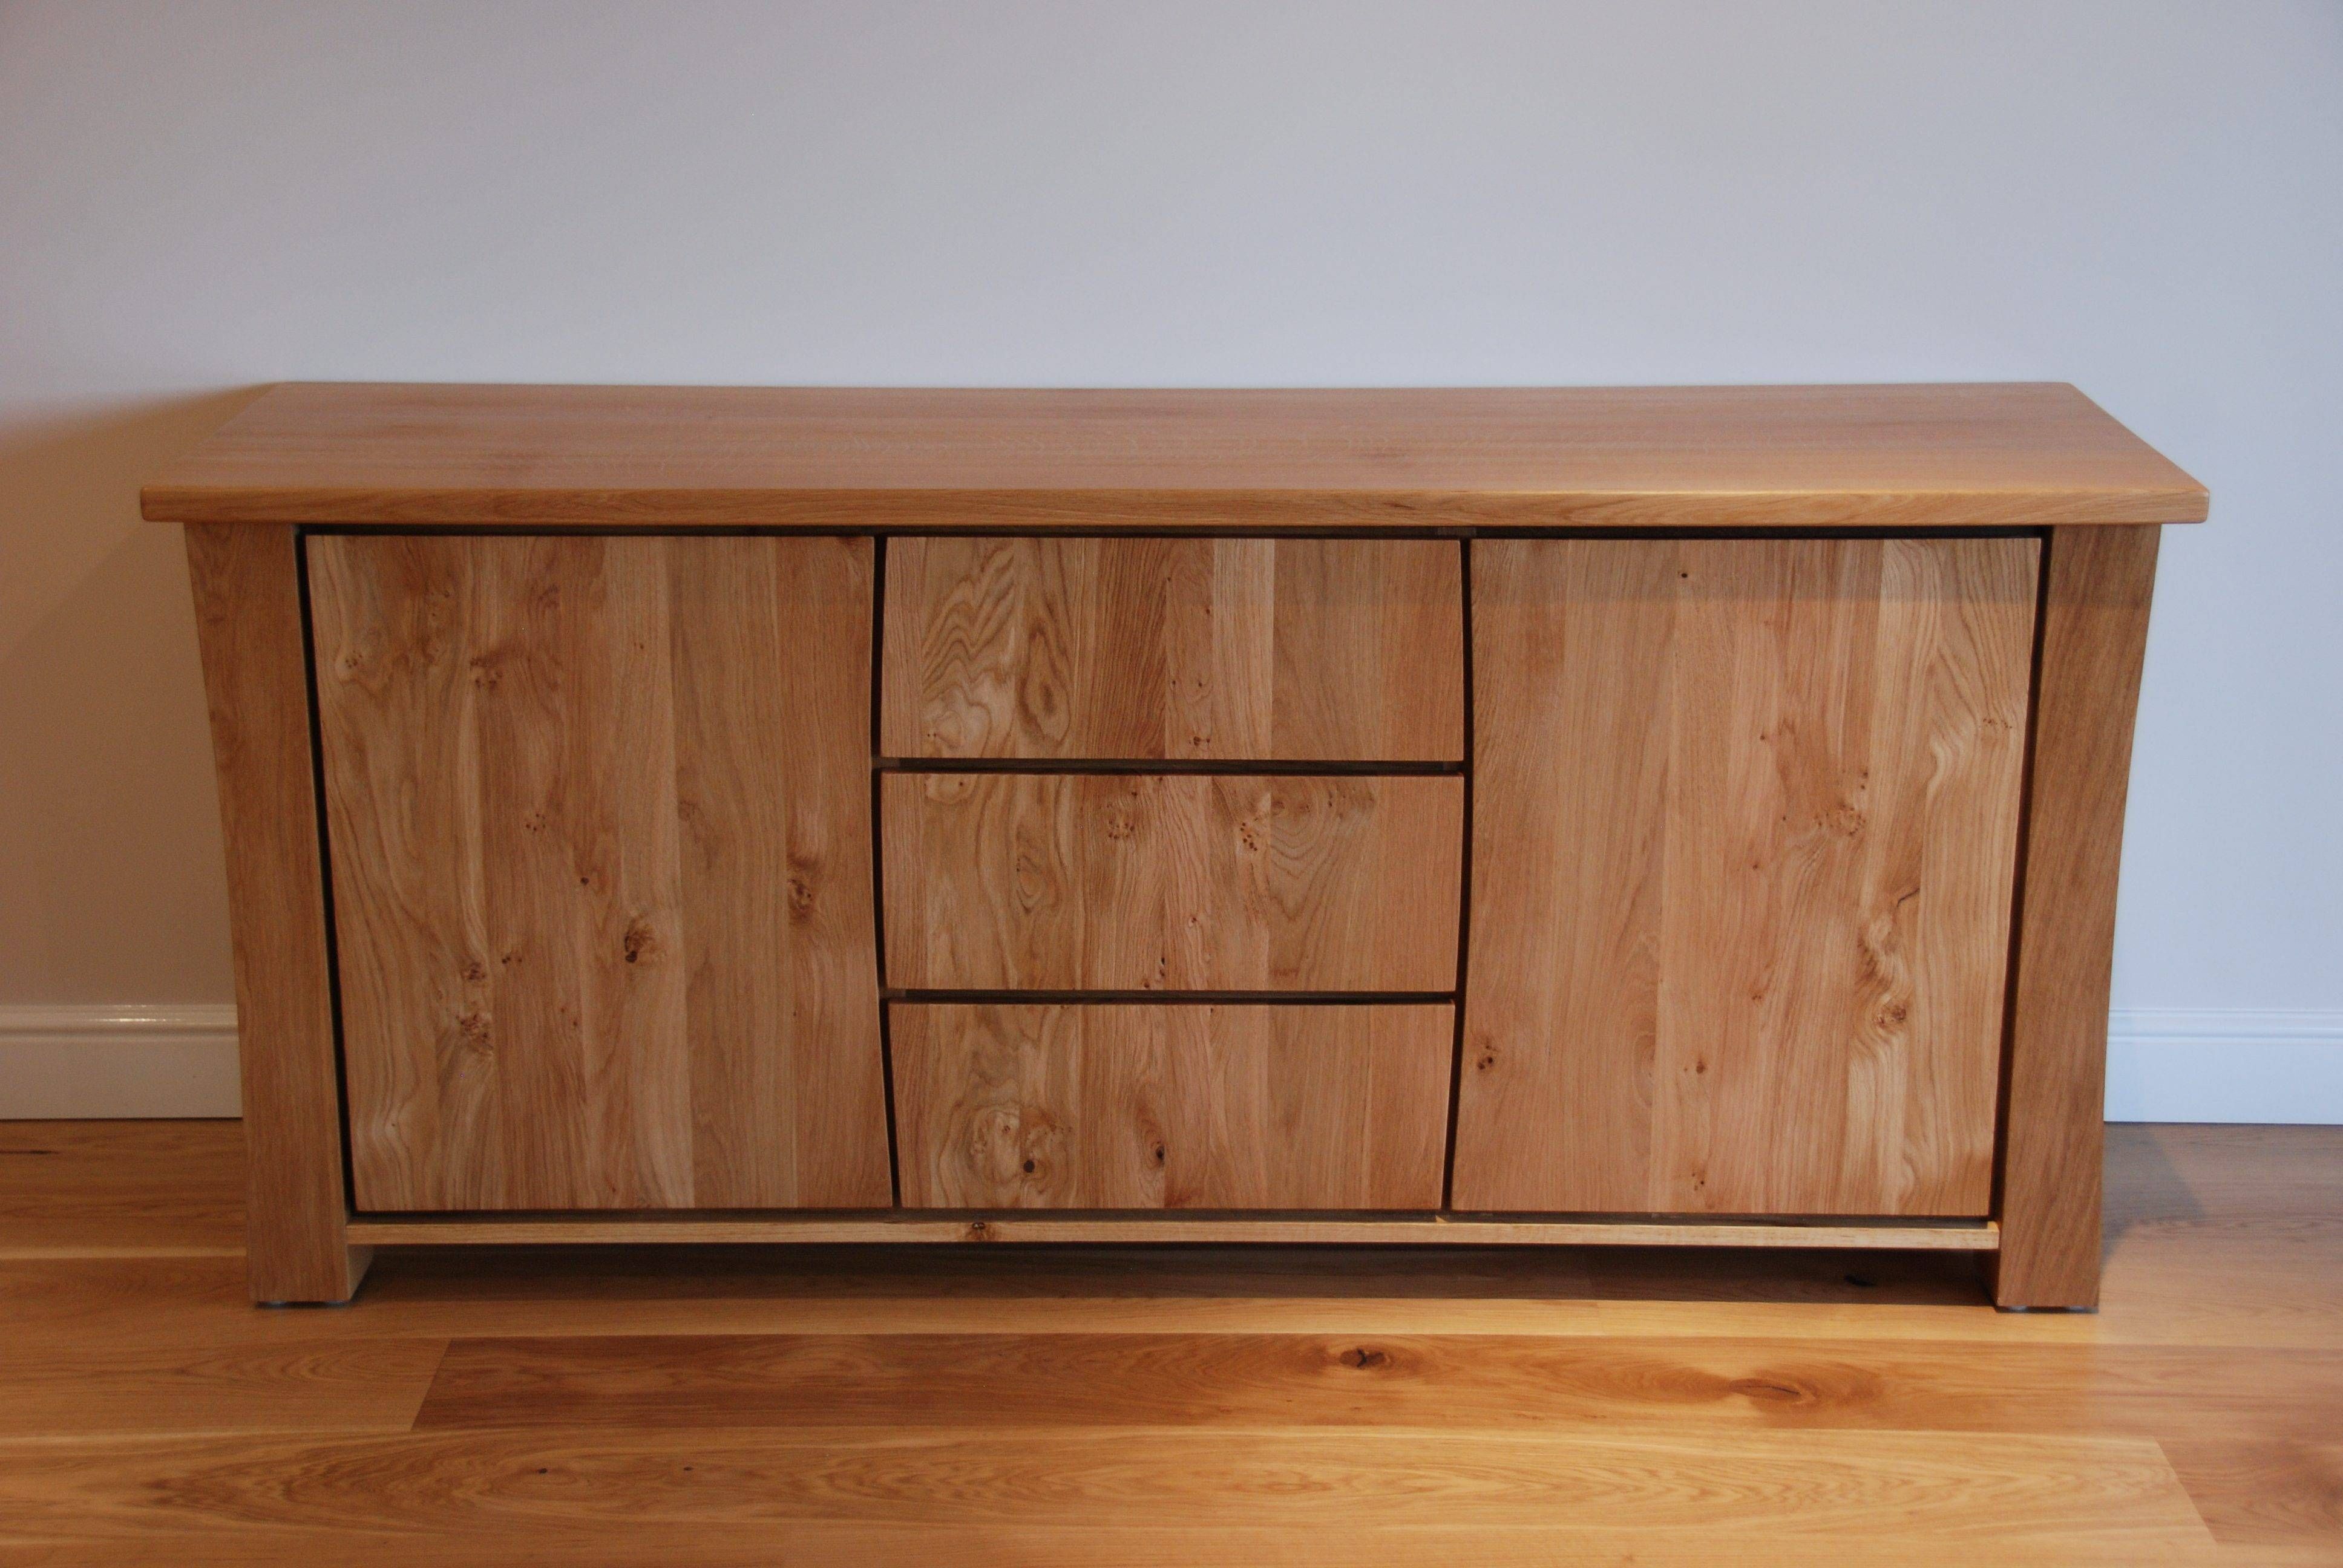 Sideboard And Tv Unit Commission | Bespokegreenoak With Regard To Sideboard Units (View 4 of 30)